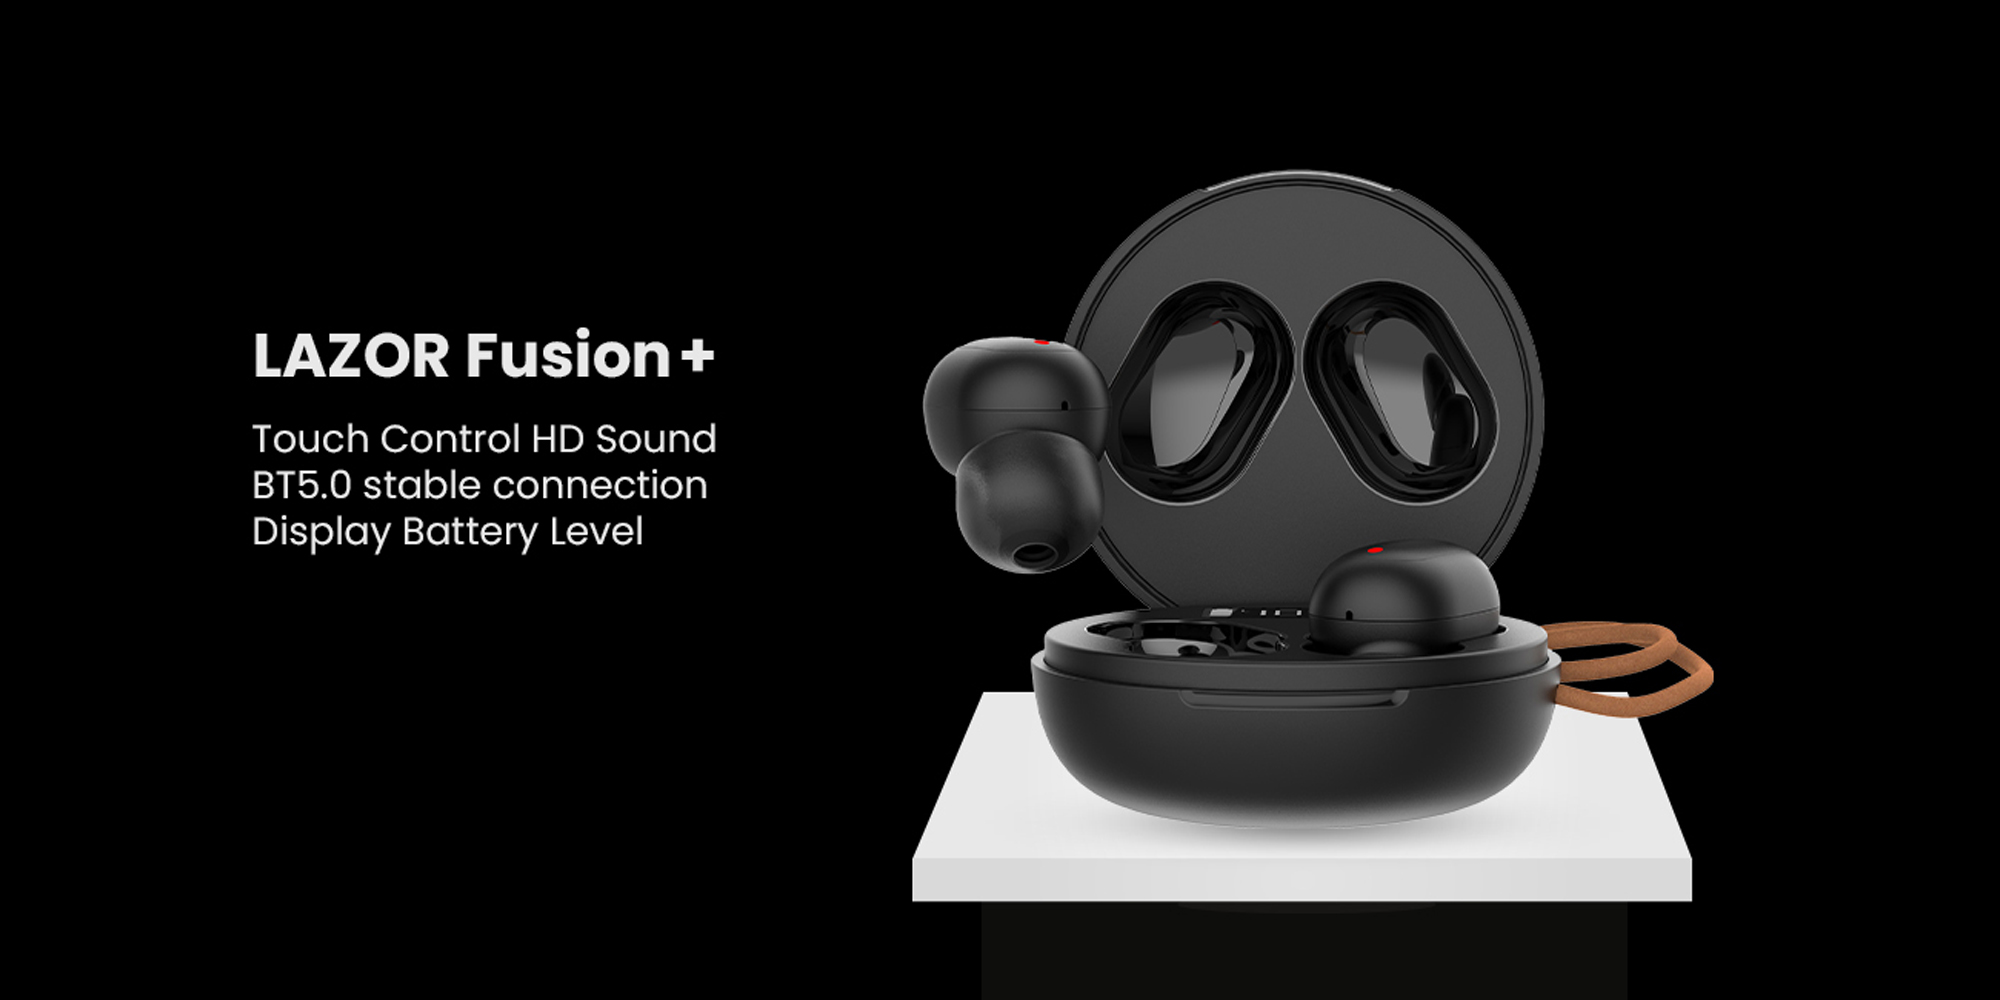 Lazor Fusion+ EA225 TWS Earbuds: Light &amp; Compact Design, HD Sound, Touch Control, BT V5.0, Type-C Charging - Black